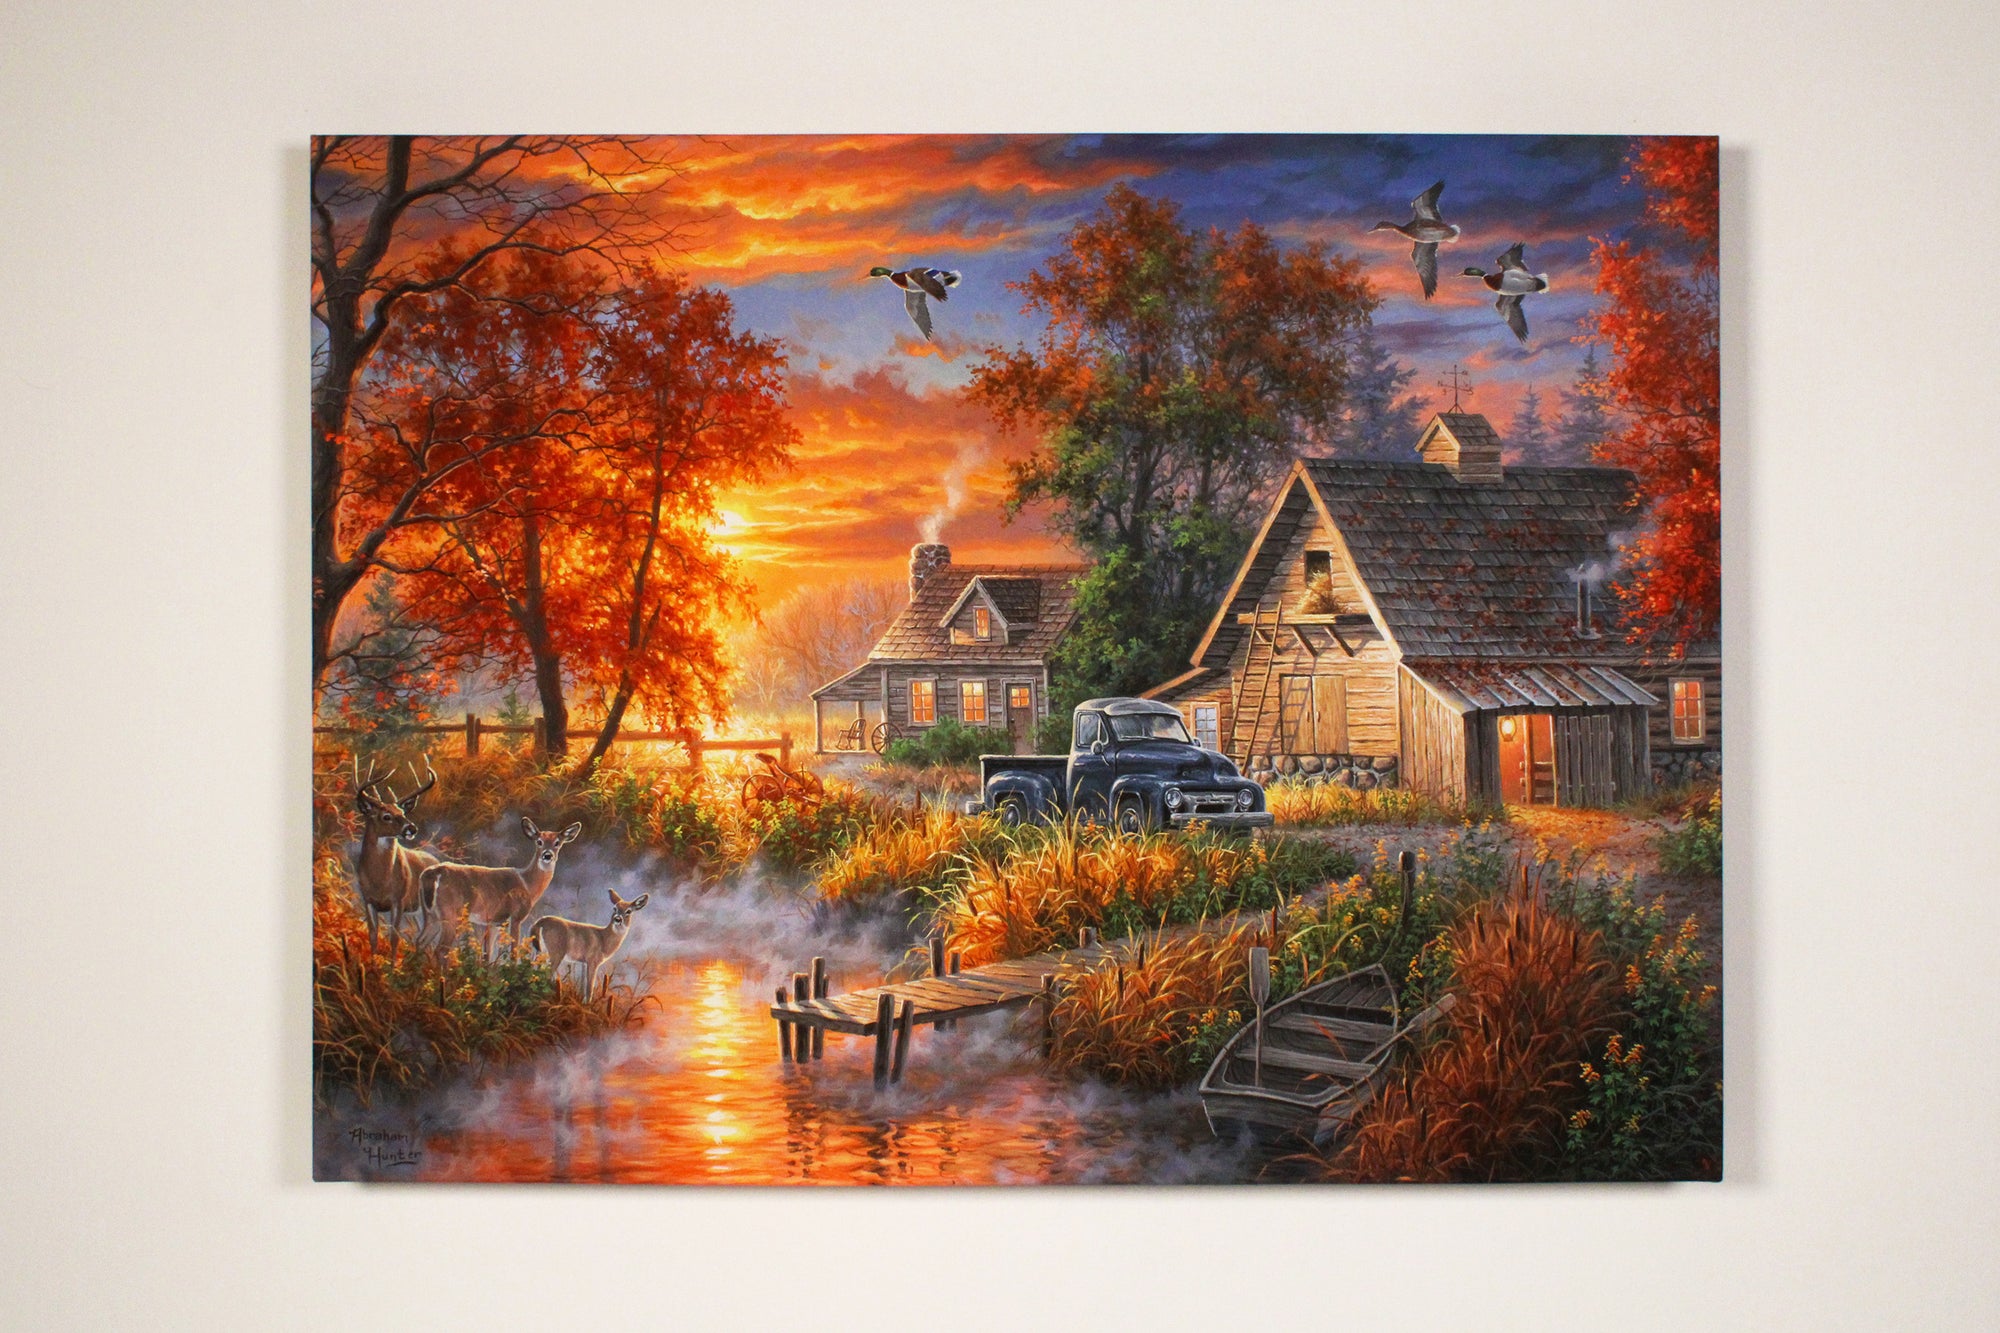 This stunning 18x24 piece captures the essence of an idyllic country farm, complete with a family of deer gracefully grazing on the banks of a tranquil creek bed.  As you gaze at this exquisite scene, you'll notice the soft glow of the LED lights highlighting every detail, from the majestic ducks flying across the sky to the charming old blue truck parked by the rustic barn and farmhouse.